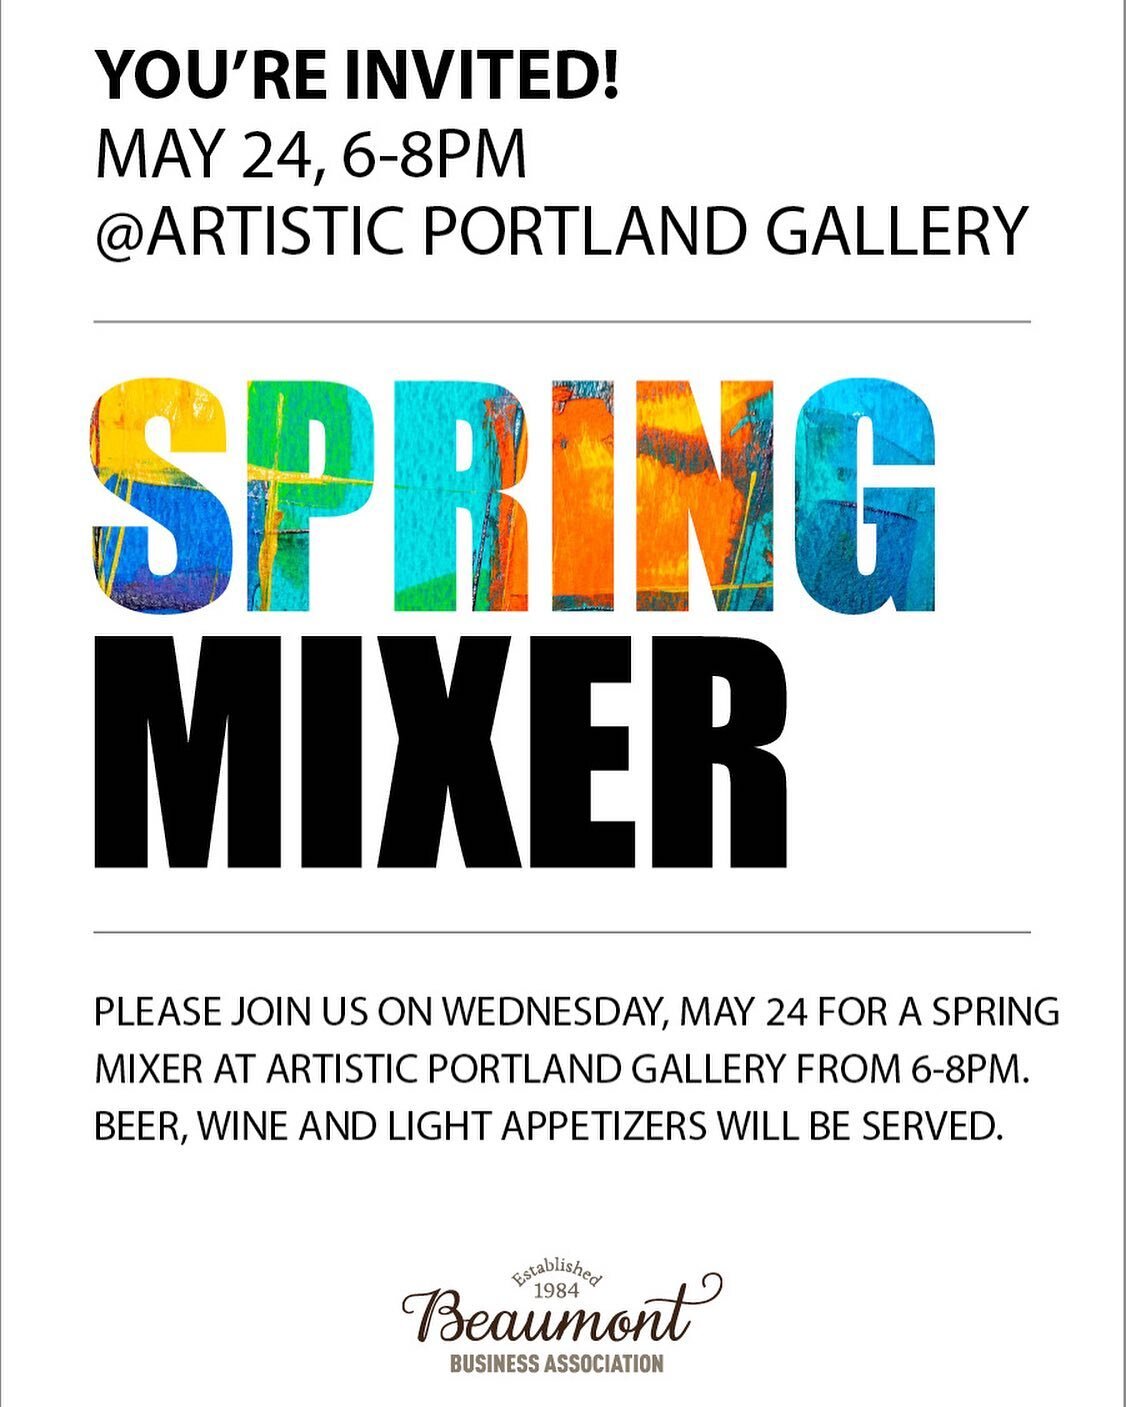 YOU&rsquo;RE INVITED!
BBA SPRING MIXER&nbsp;@ ARTISTIC PORTLAND GALLERY
WEDNESDAY, MAY 24, 6-8PM

&bull; Come and mingle&nbsp;
&bull; Connect with fellow businesses&nbsp;
&bull; Meet the BBA Board&nbsp;
&bull; Have a drink and some light appetizers
&